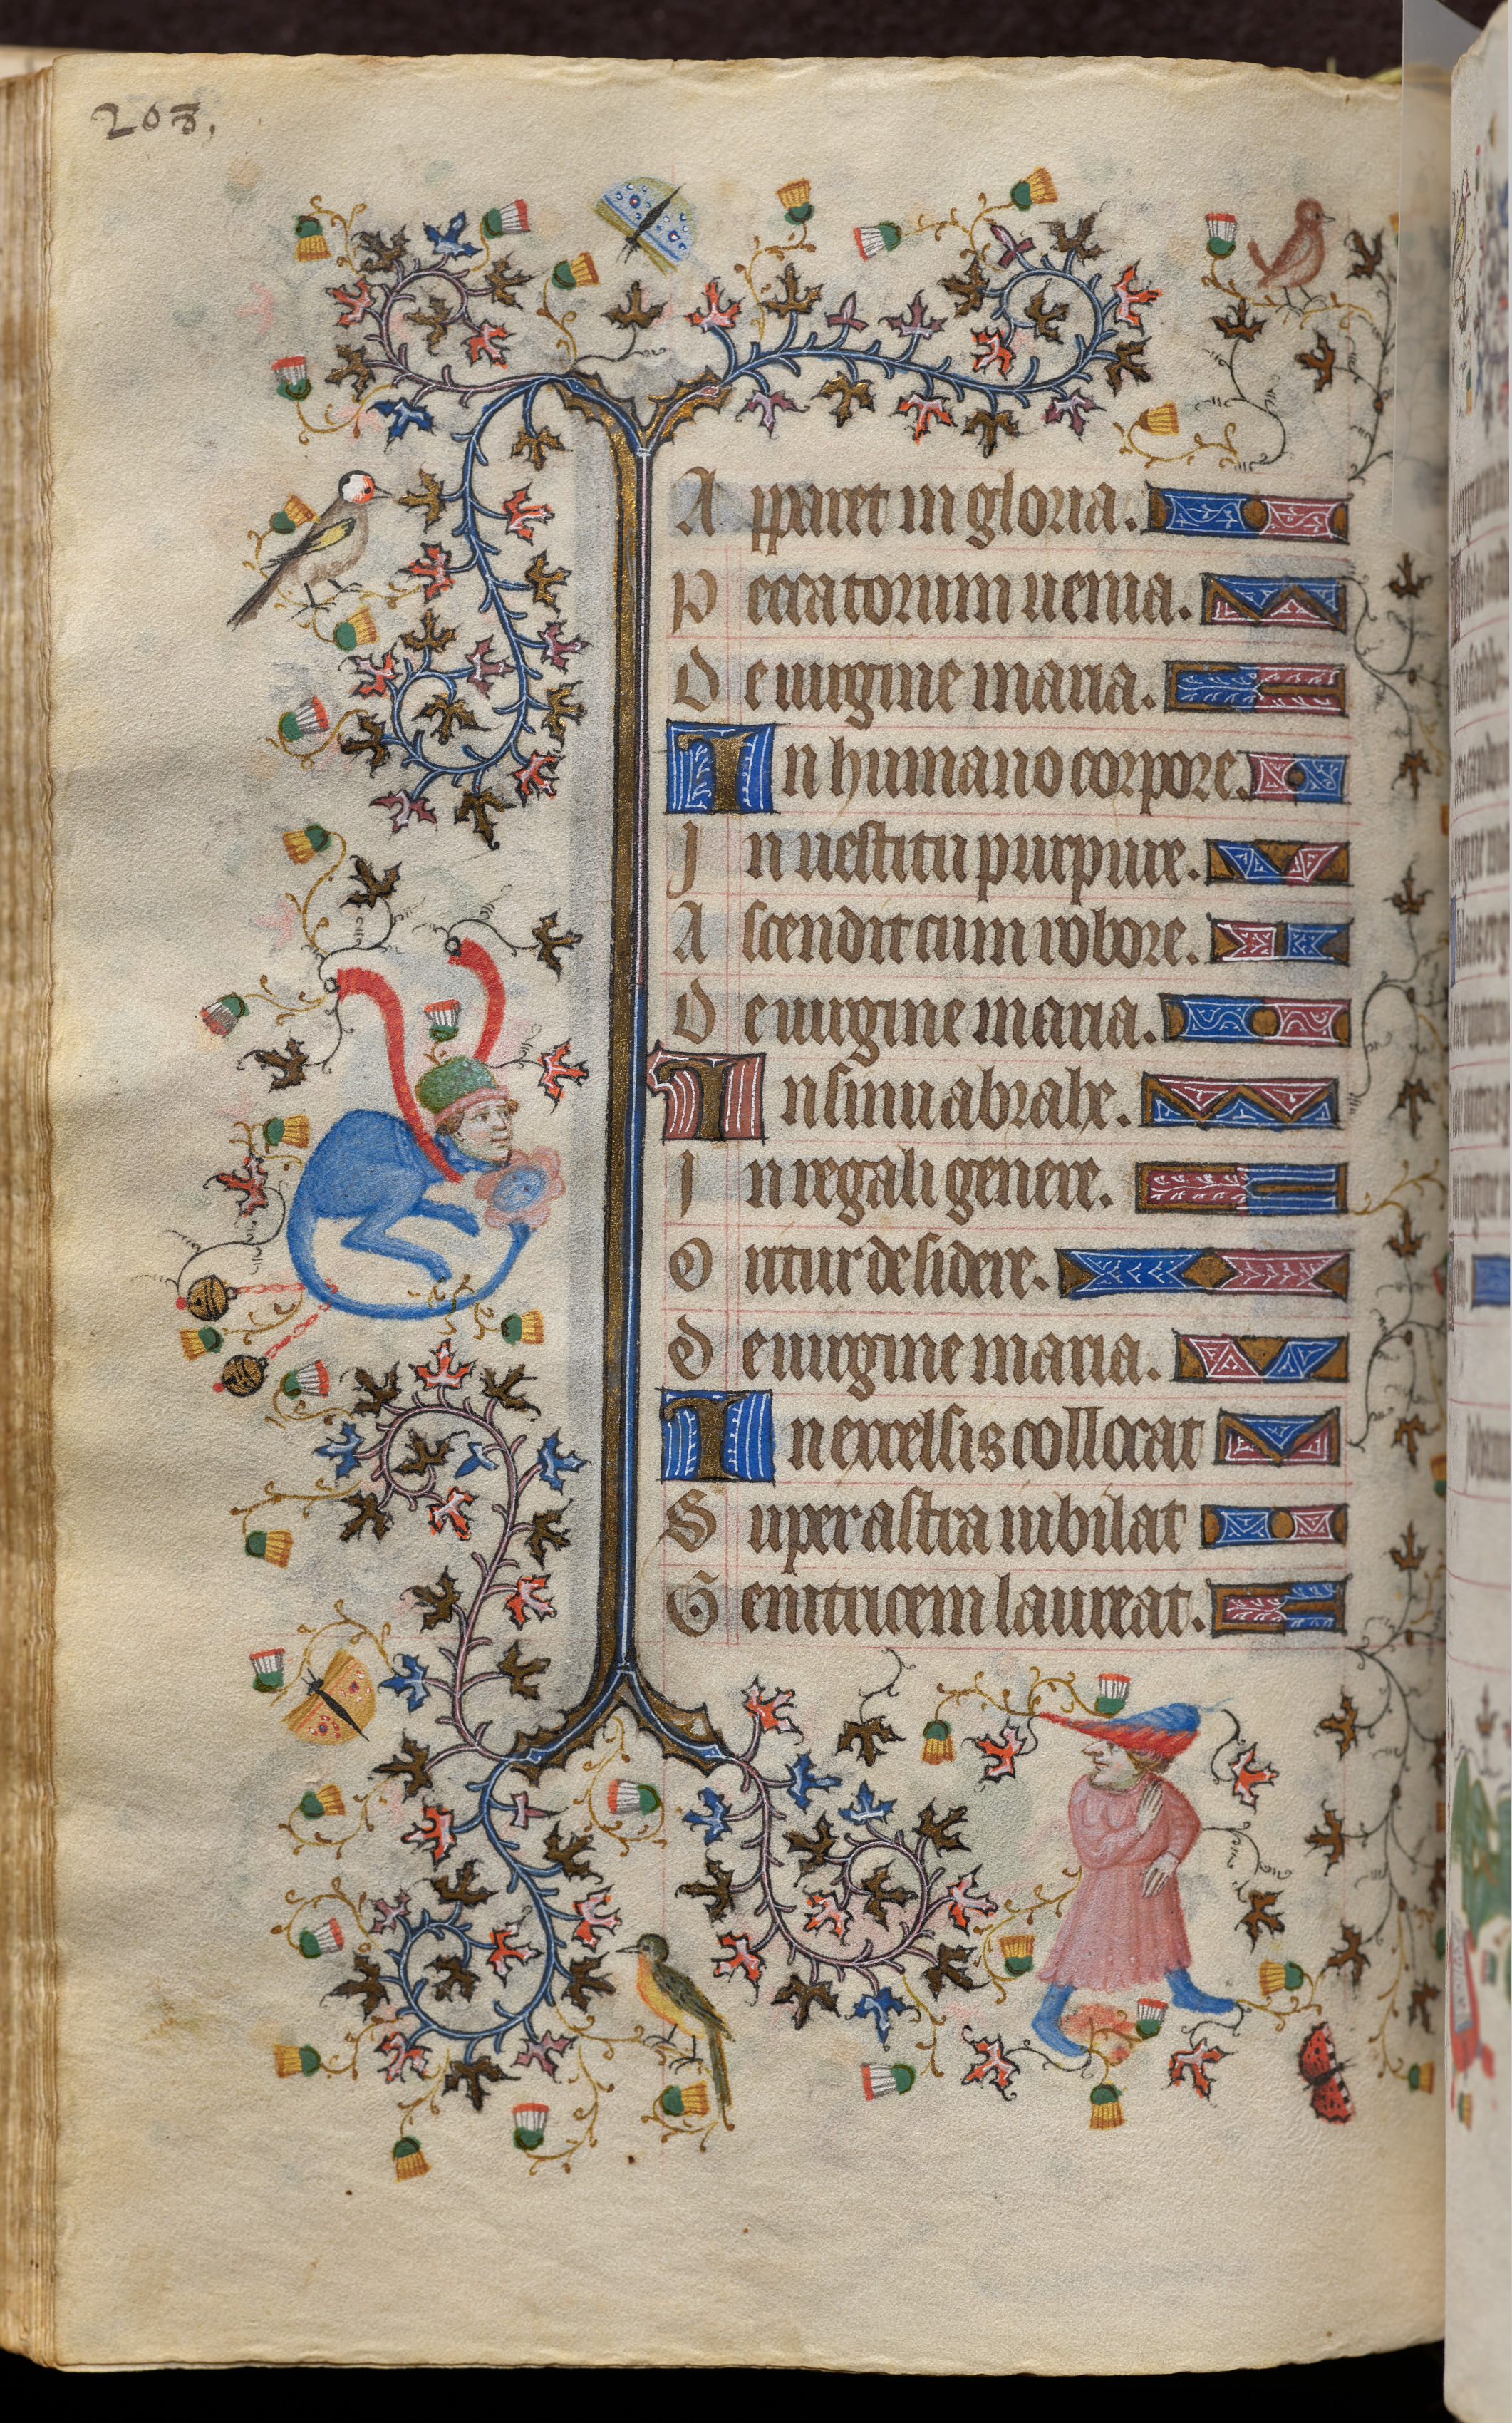 Hours of Charles the Noble, King of Navarre (1361-1425): fol. 104v, Text